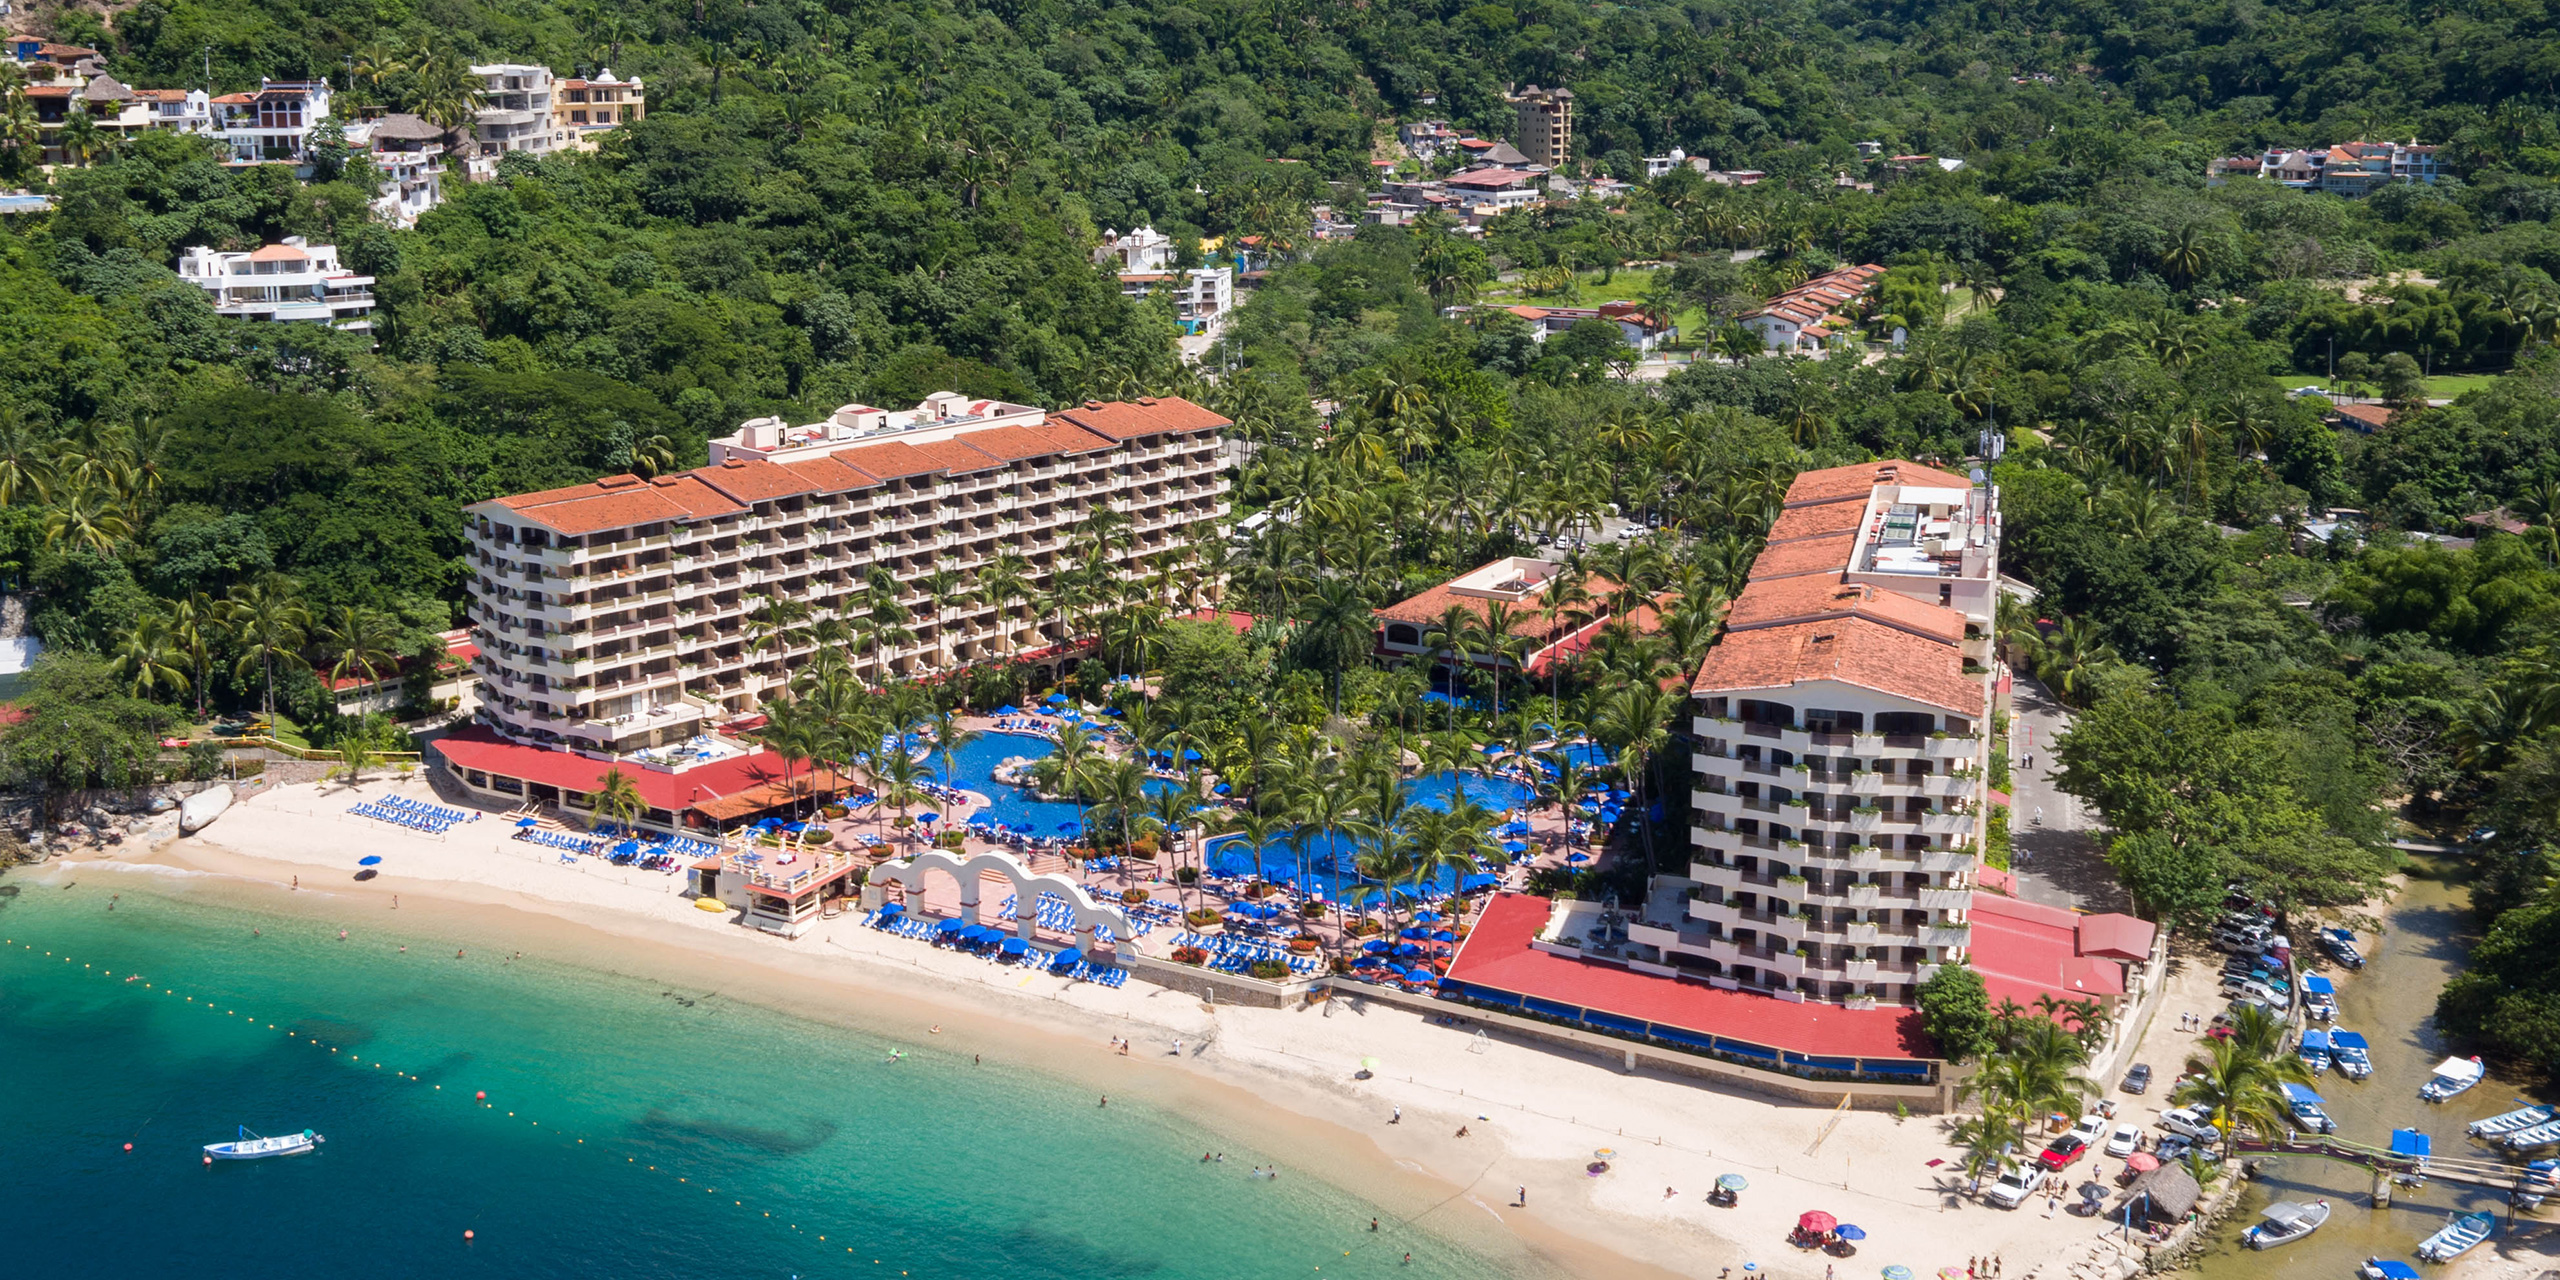 10 Best All Inclusive Resorts For Families Of 5 Or More 2020 2020